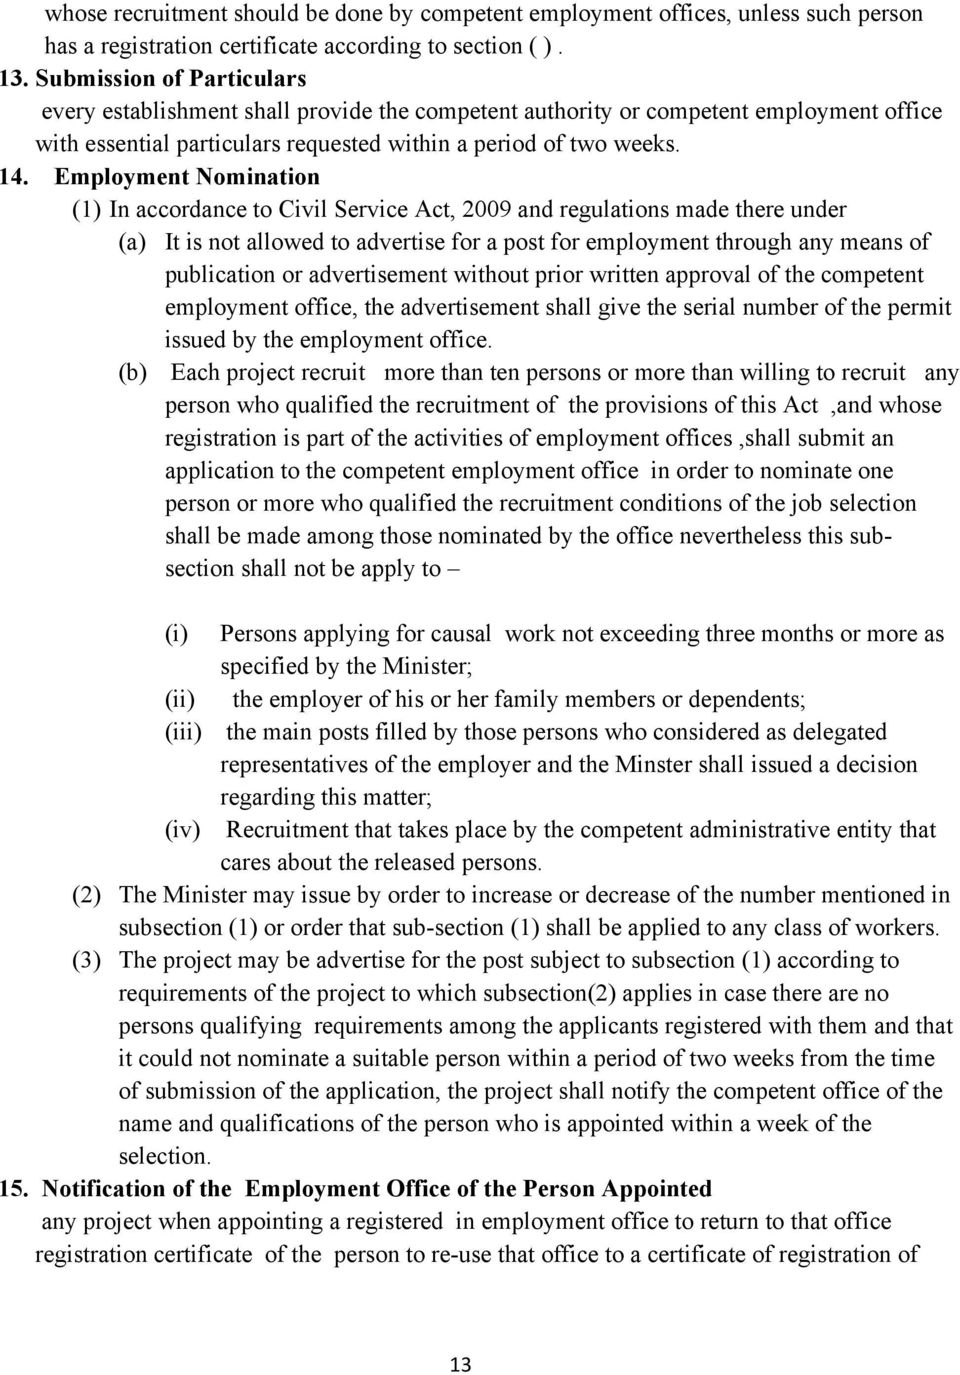 Employment Nomination (1) In accordance to Civil Service Act, 2009 and regulations made there under (a) It is not allowed to advertise for a post for employment through any means of publication or